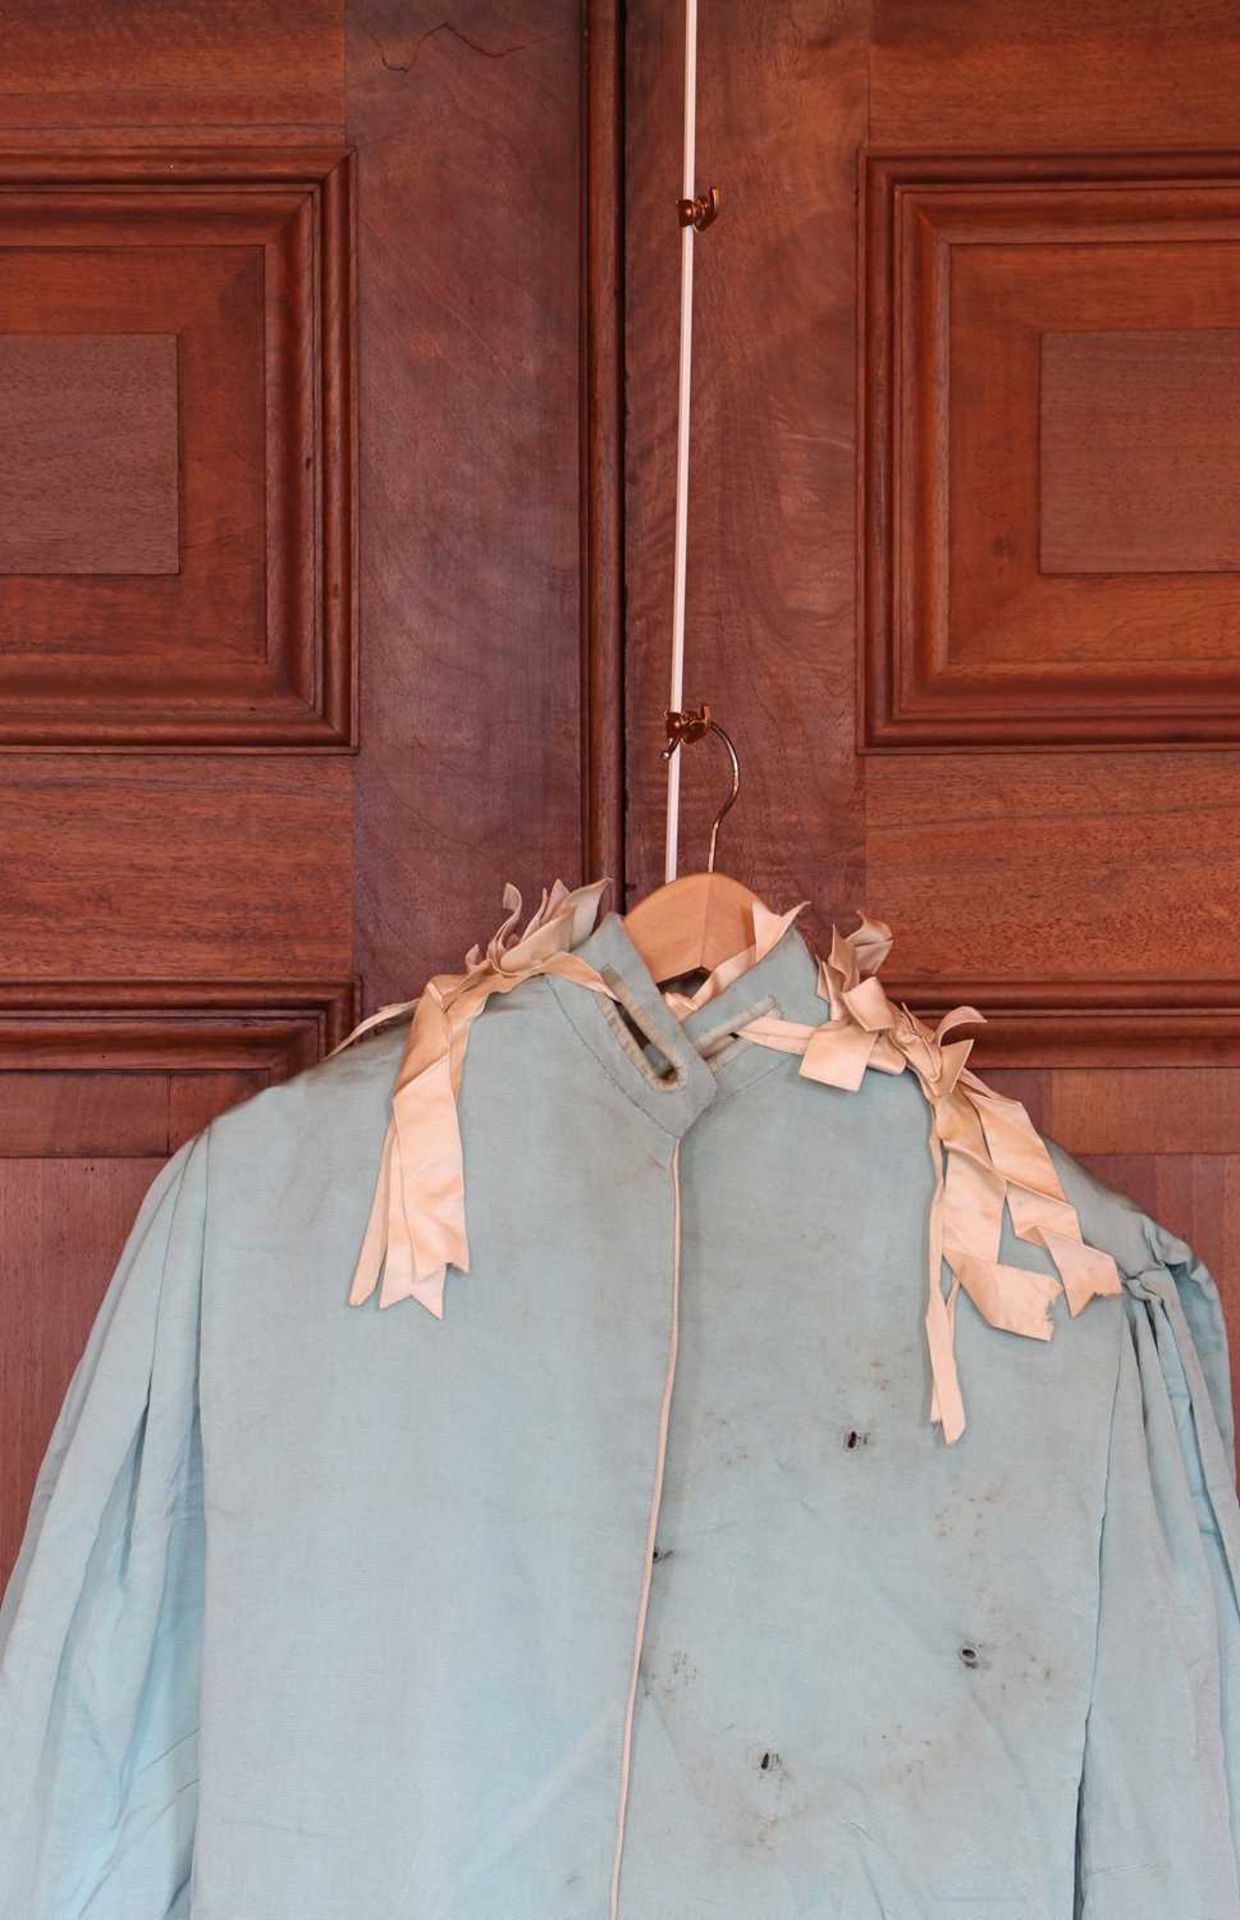 ☘ A ceremonial robe of the Grand Order of the Knights of St Patrick, - Image 3 of 8